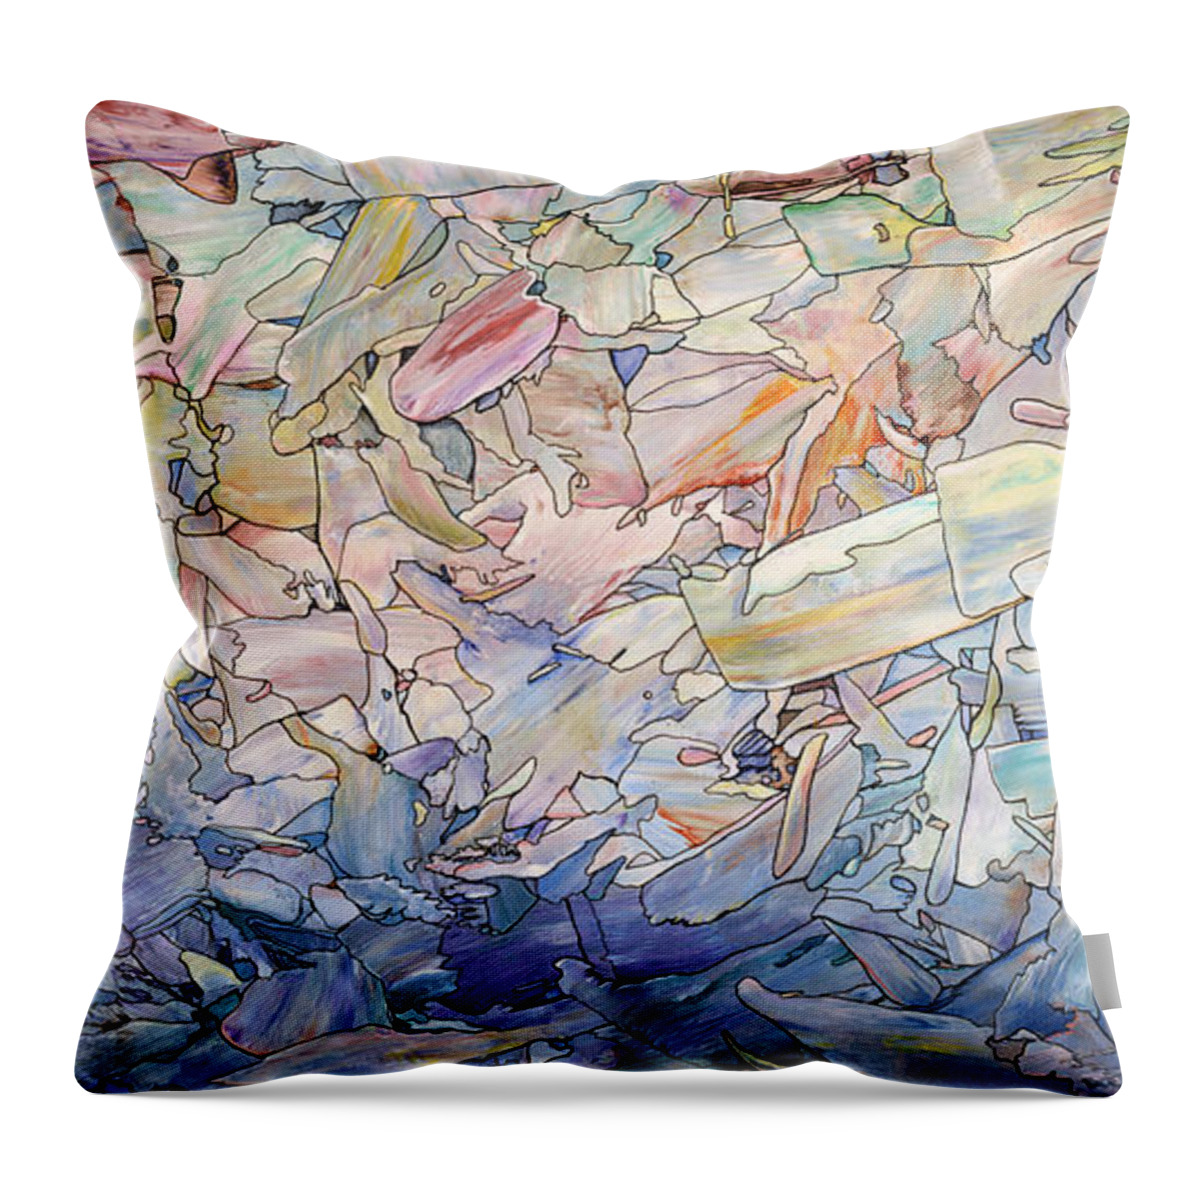 Sea Throw Pillow featuring the painting Fragmented Sea by James W Johnson